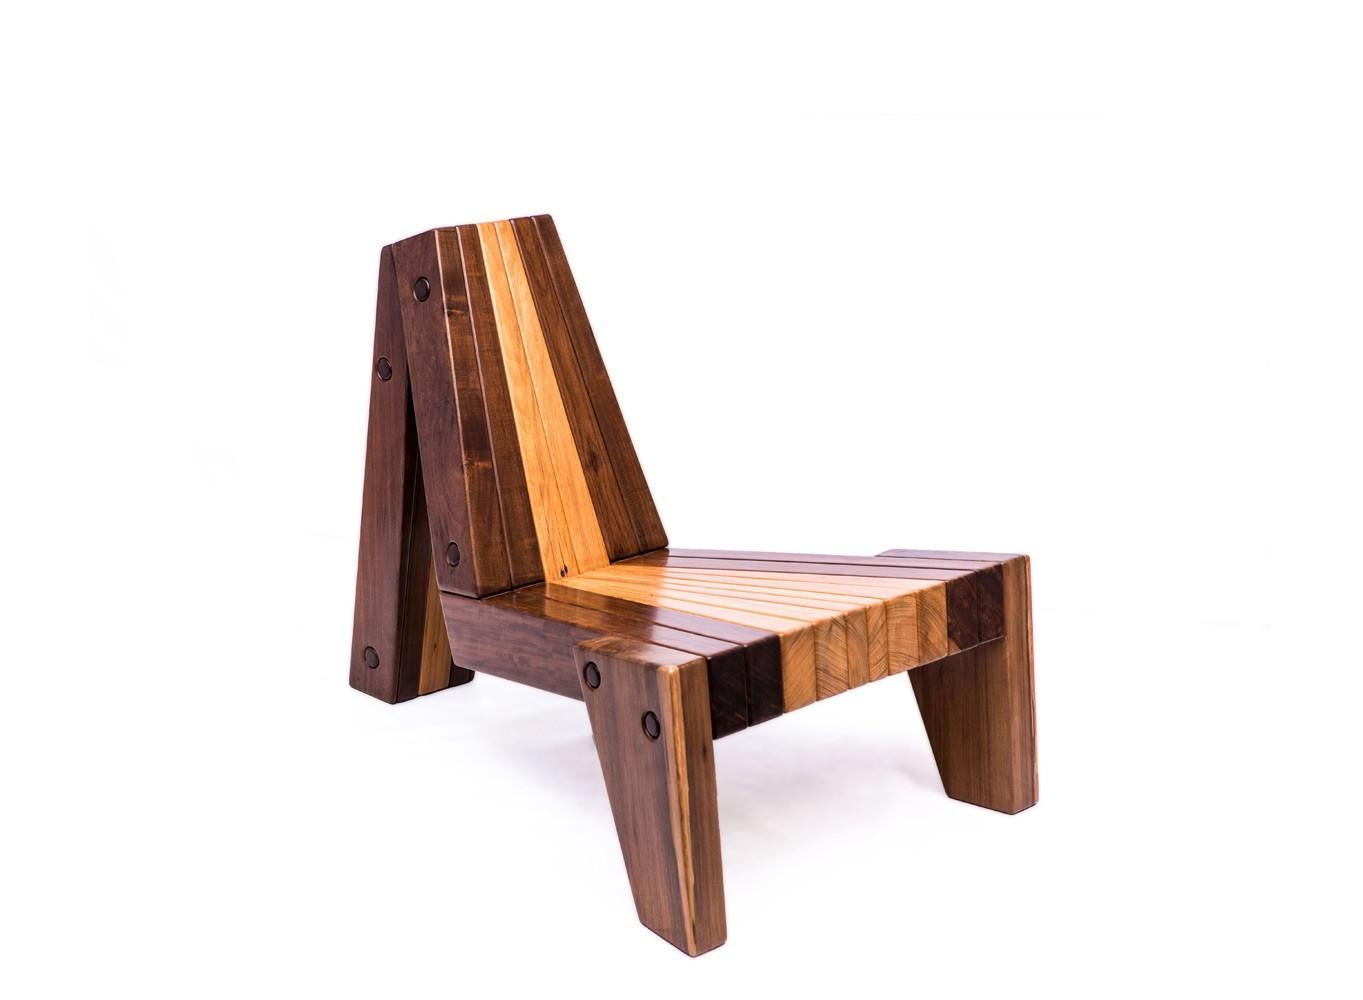 The Enrico armchair represents an exercise on the possibilities and limitations of handcrafted wood. An one-of-a-kind, unique piece created by Zanini de Zanine Caldas. 

Zanini de Zanine was born in Rio de Janeiro, in 1978. There, he worked with